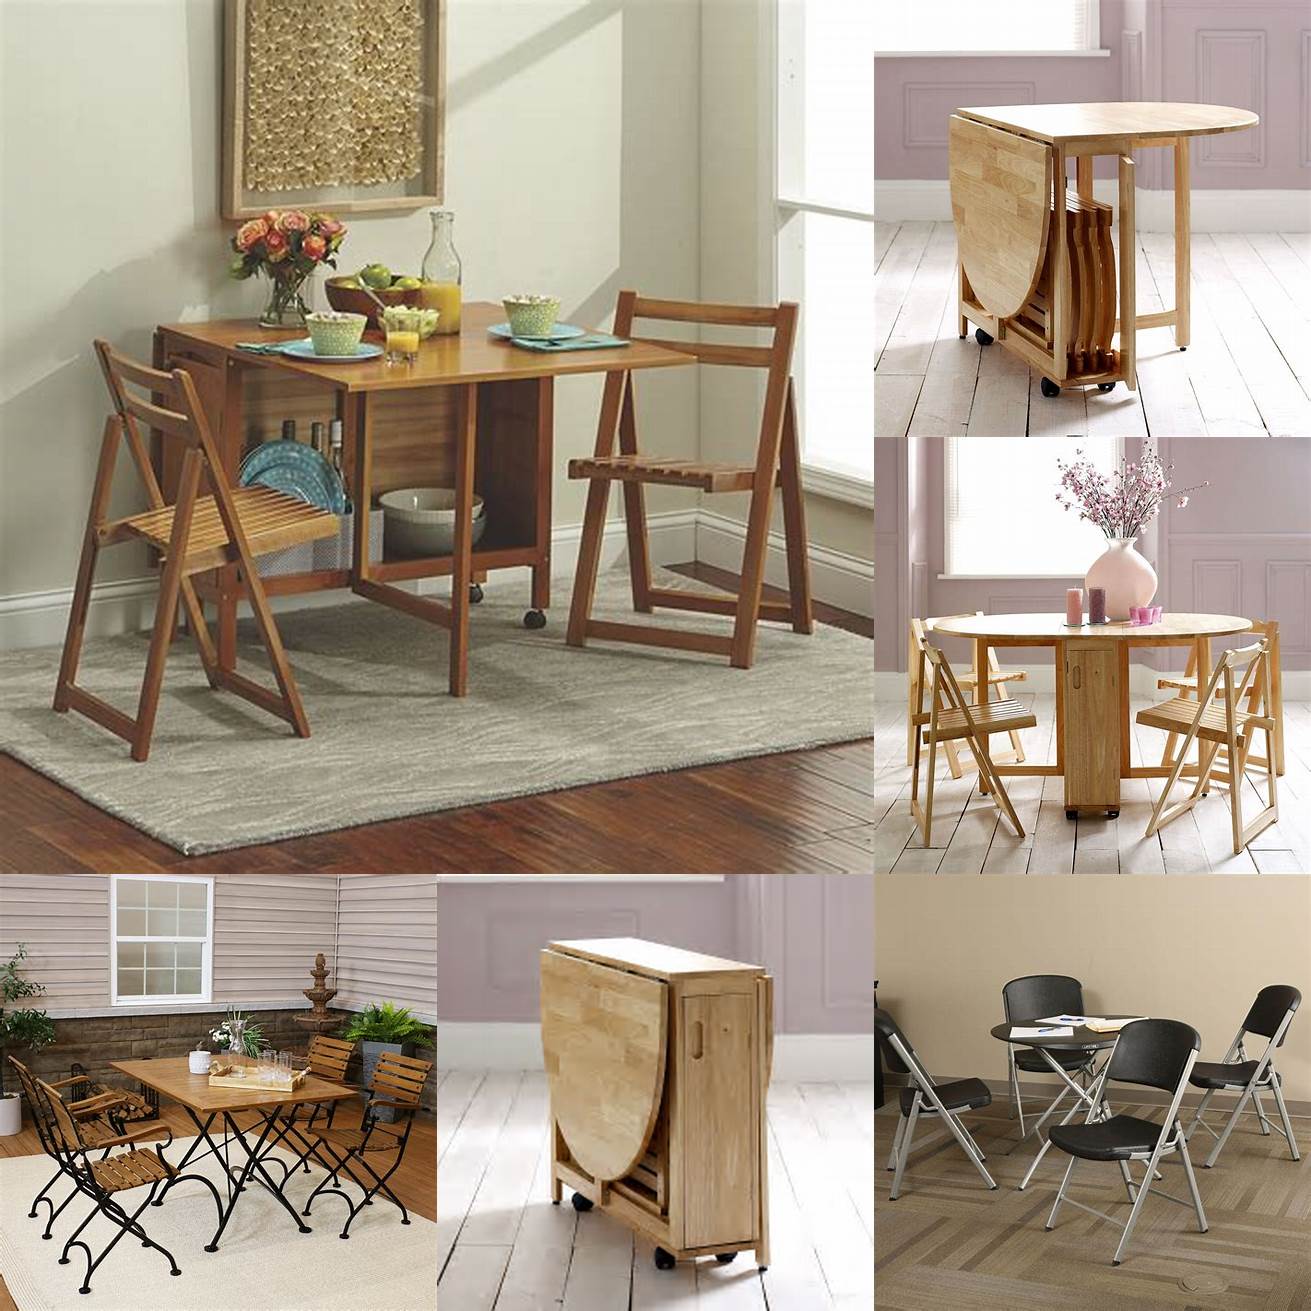 Folding table with chairs